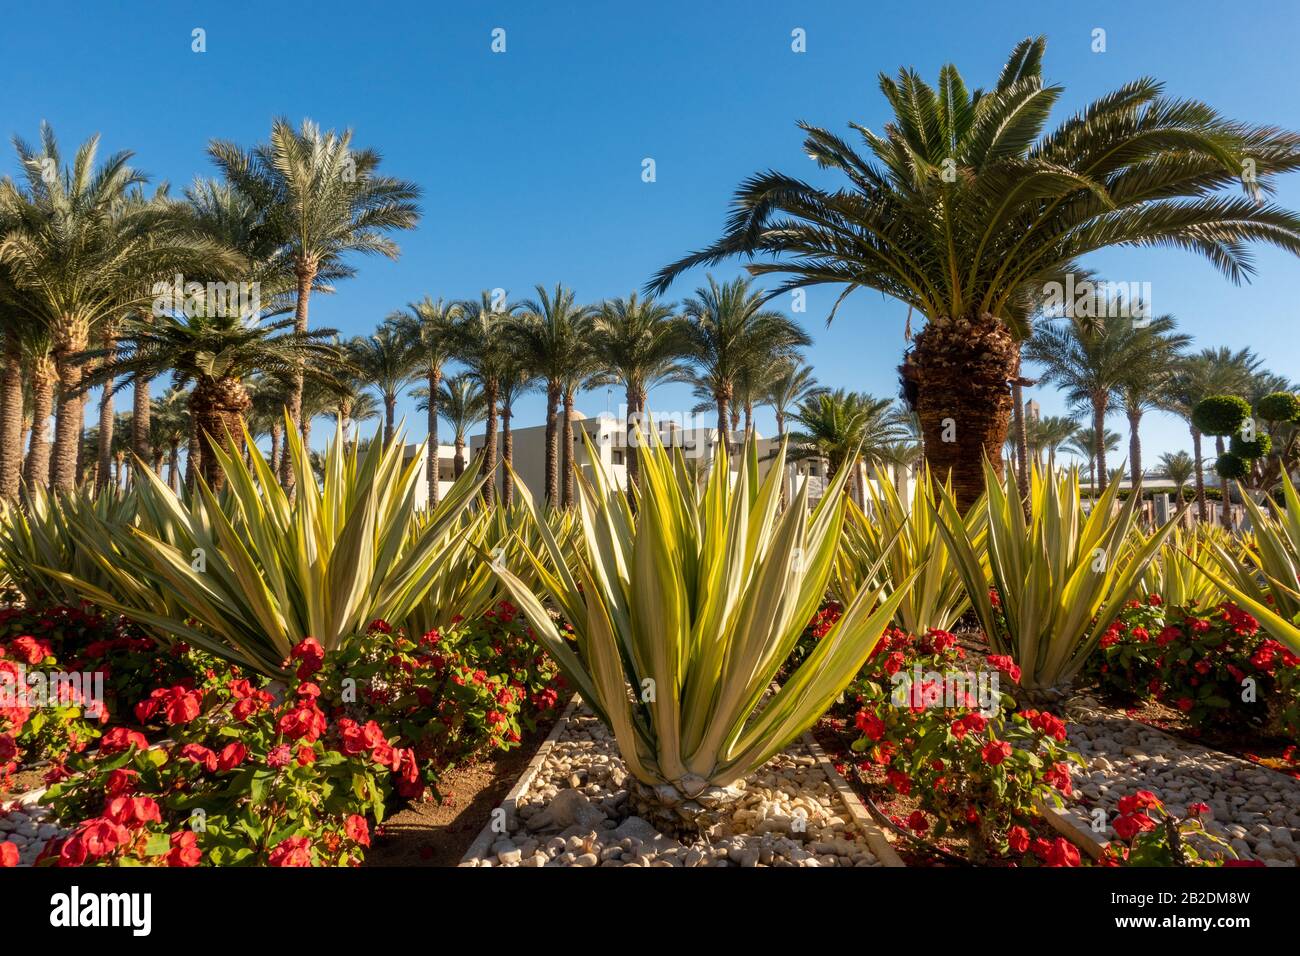 Botanical Garden With Exotic Plants In Egypt. Palm Trees, Green Agave And Blooming Red Flowers. Well Maintained Garden In Resort City In Summer Sunny Stock Photo